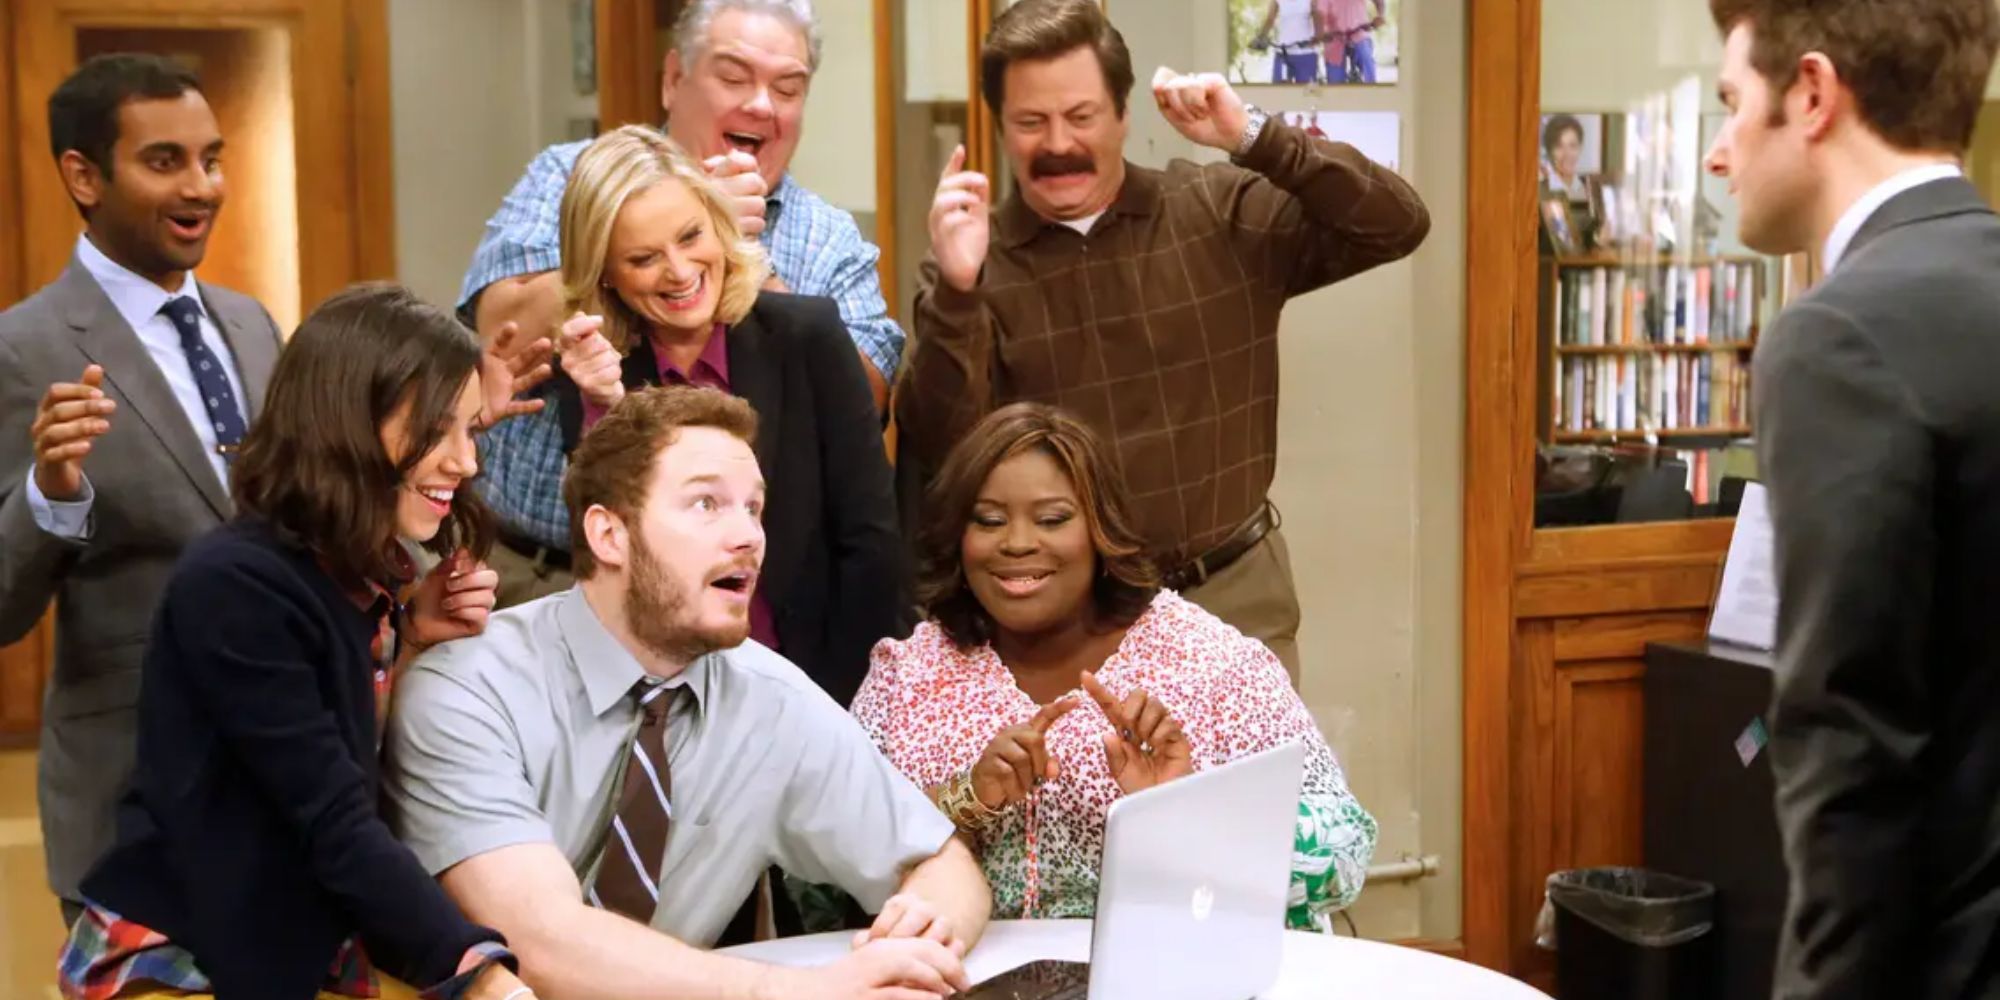 The cast of Parks and Recreation celebrating